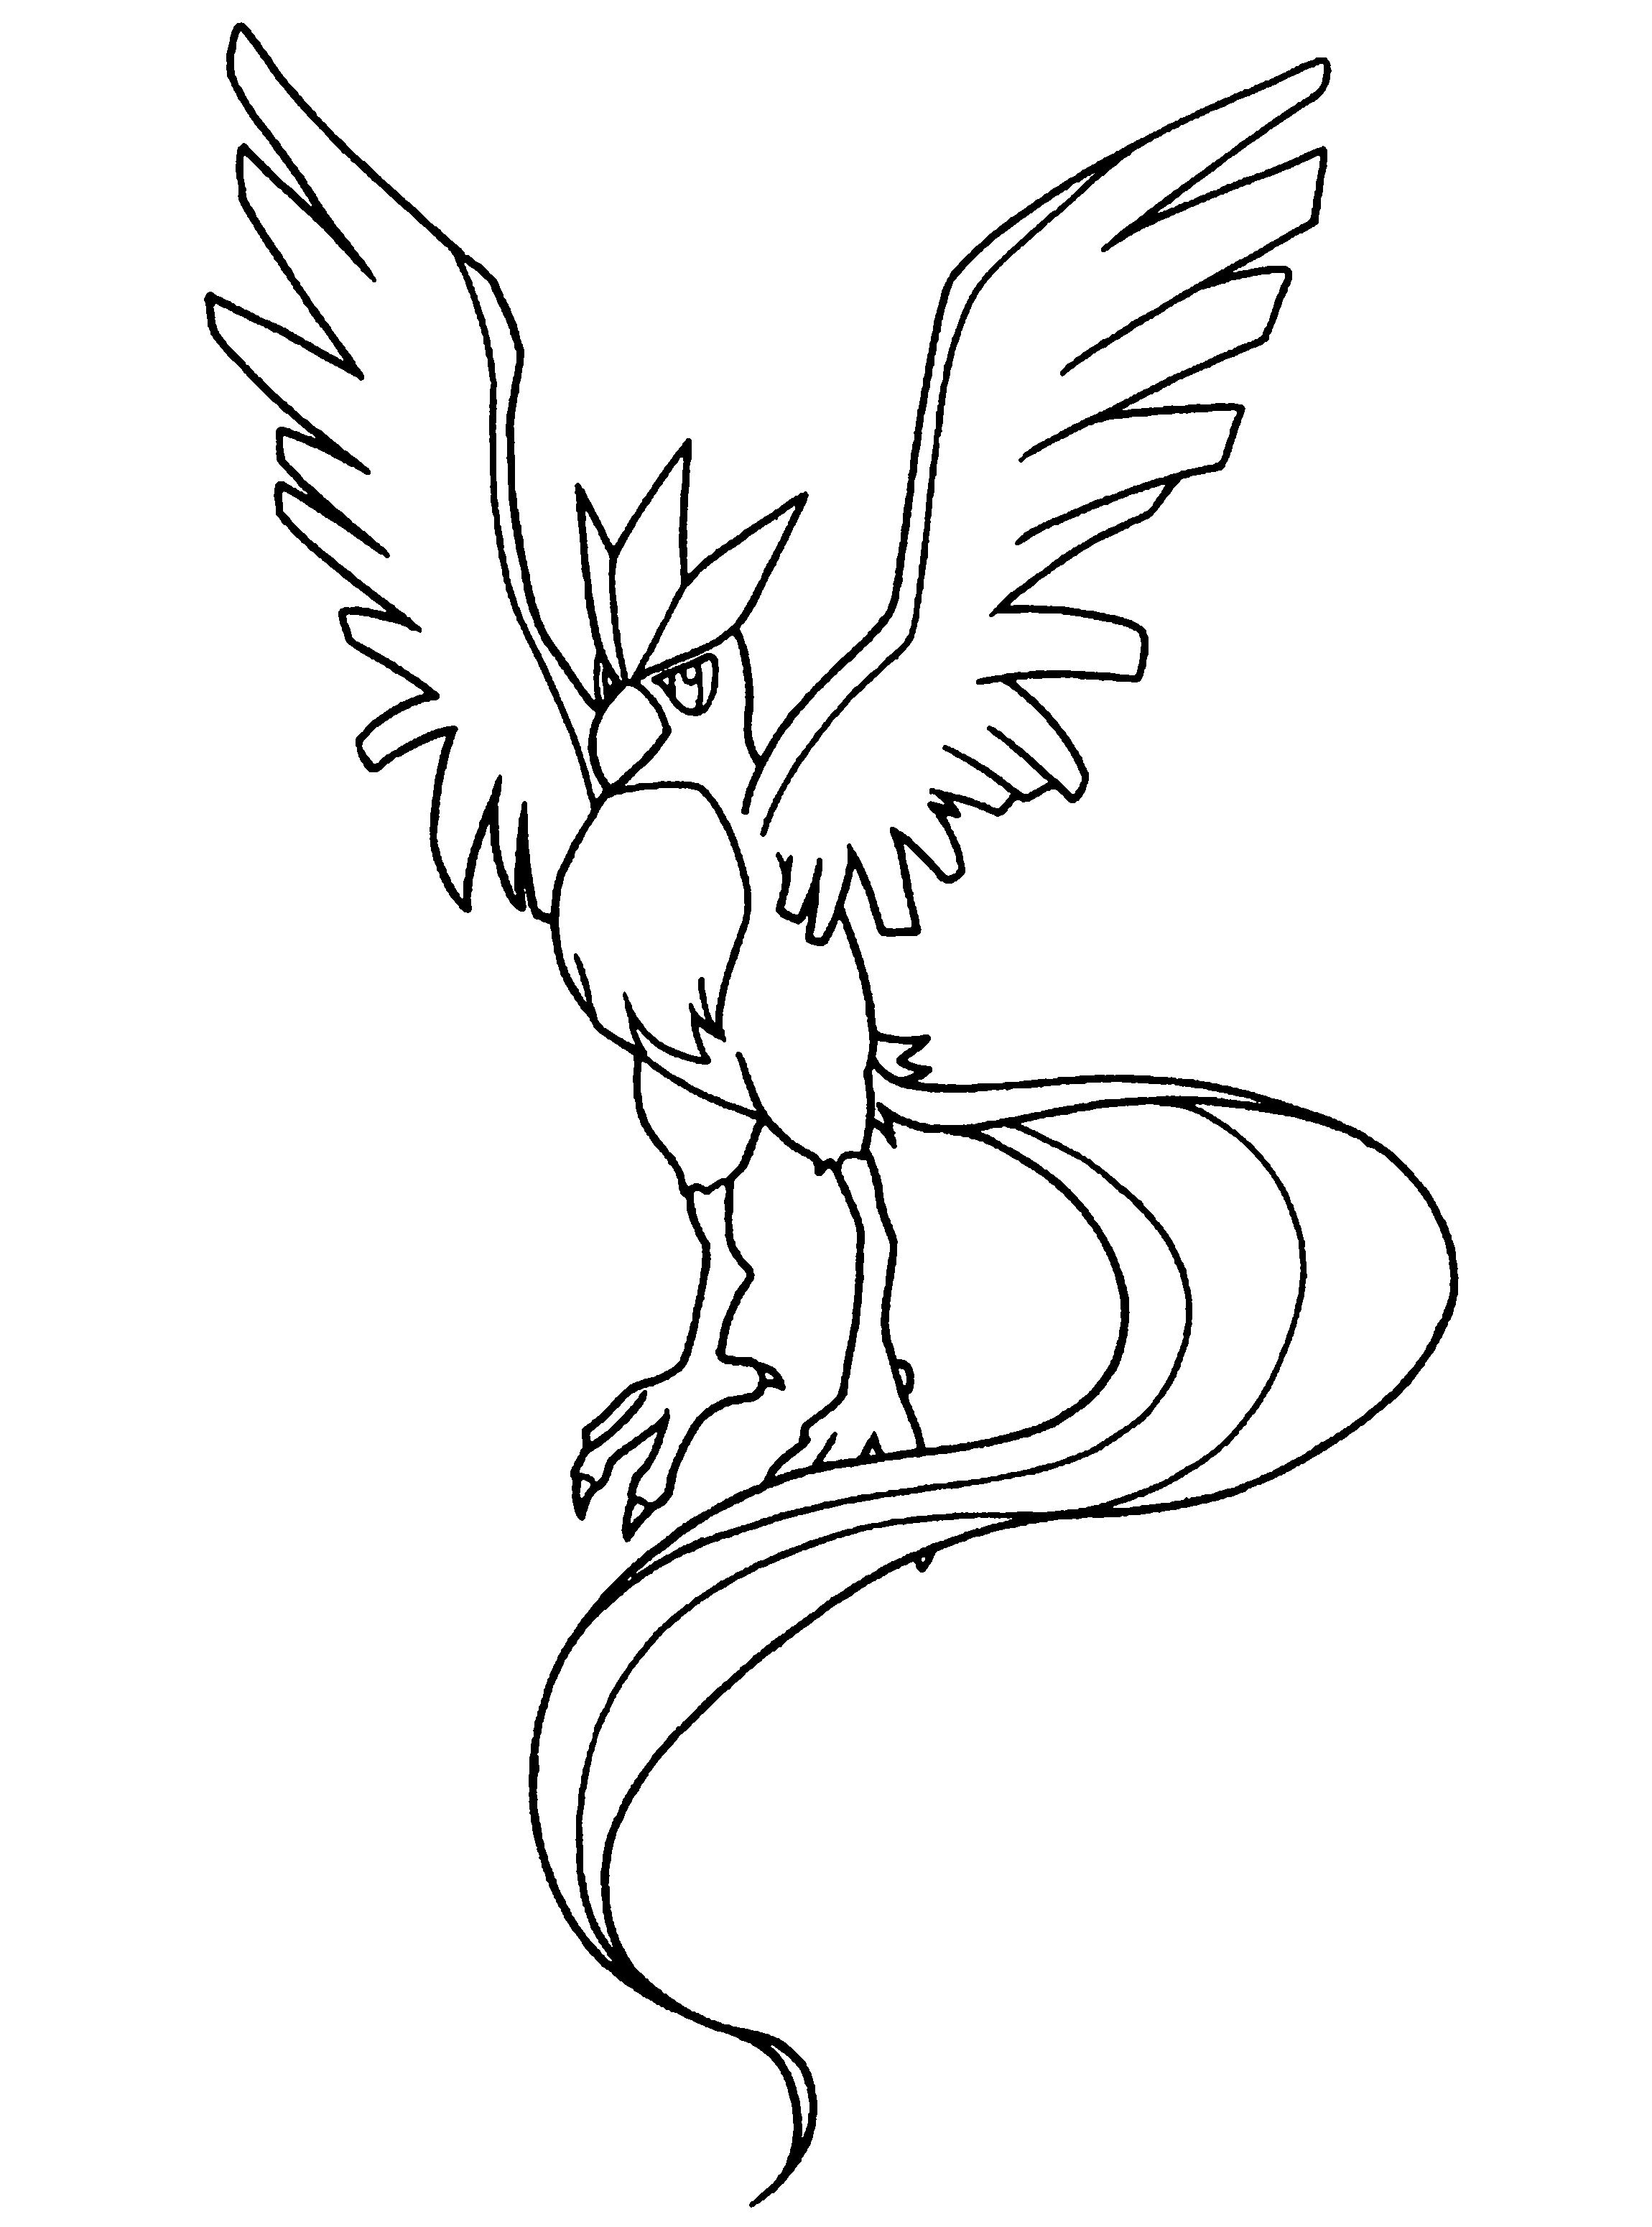 All Legendary Pokemon Coloring Pages at Free